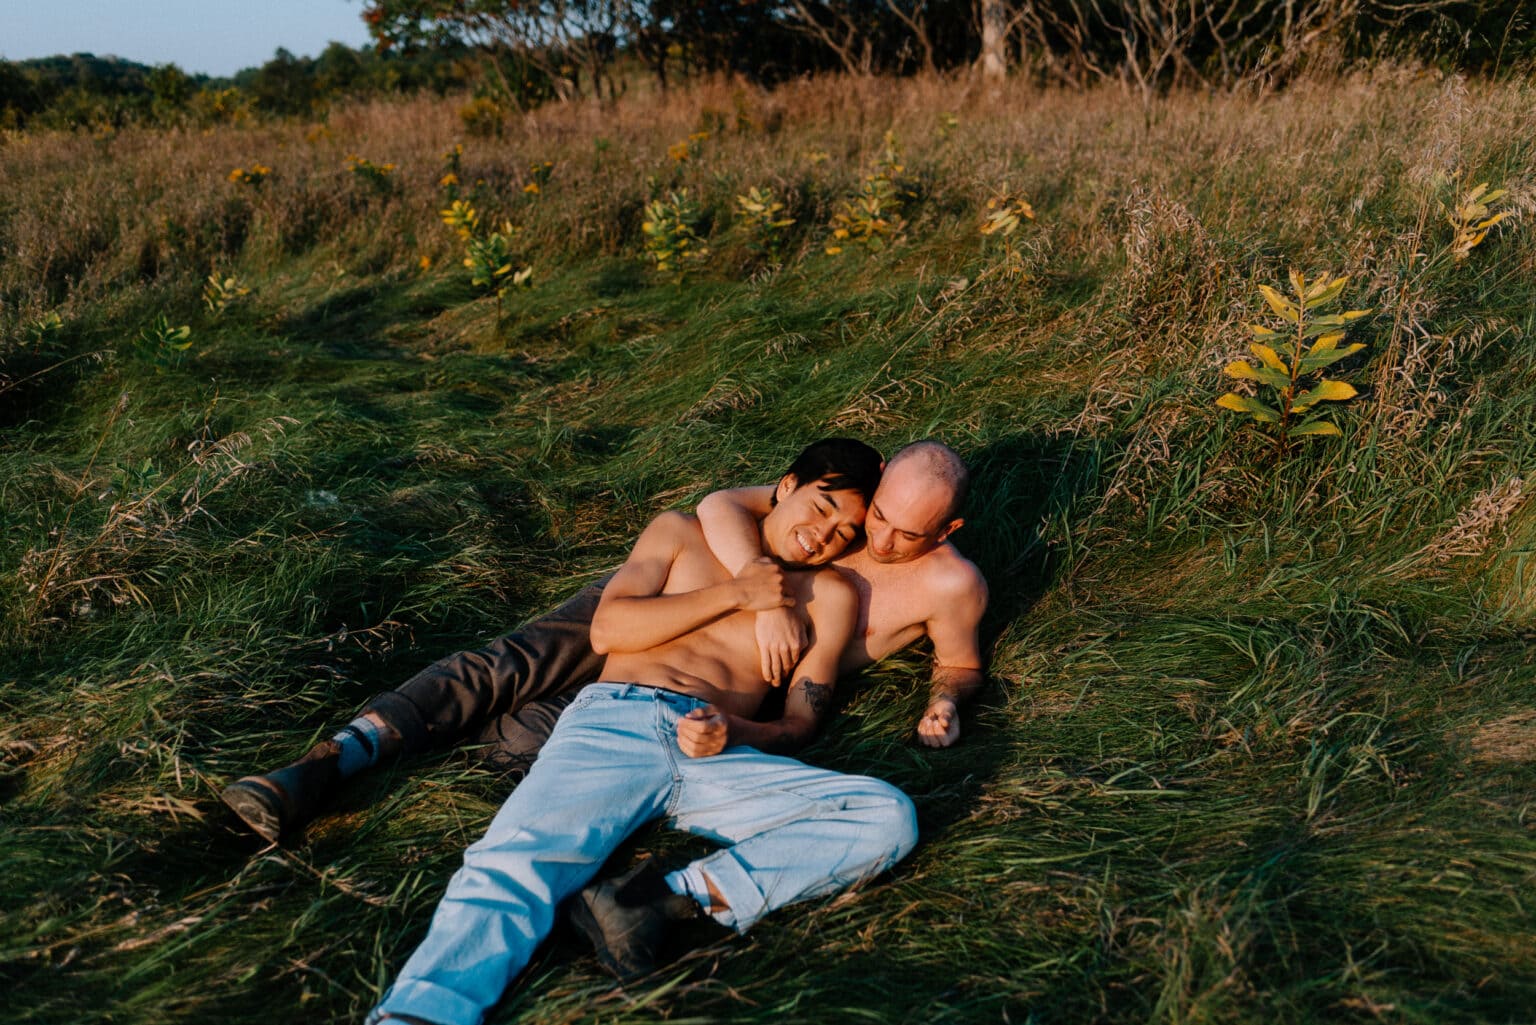 Gay couple laying in a field of tall grass shirtless holding each other in boudoir photography shoot in Toronto.